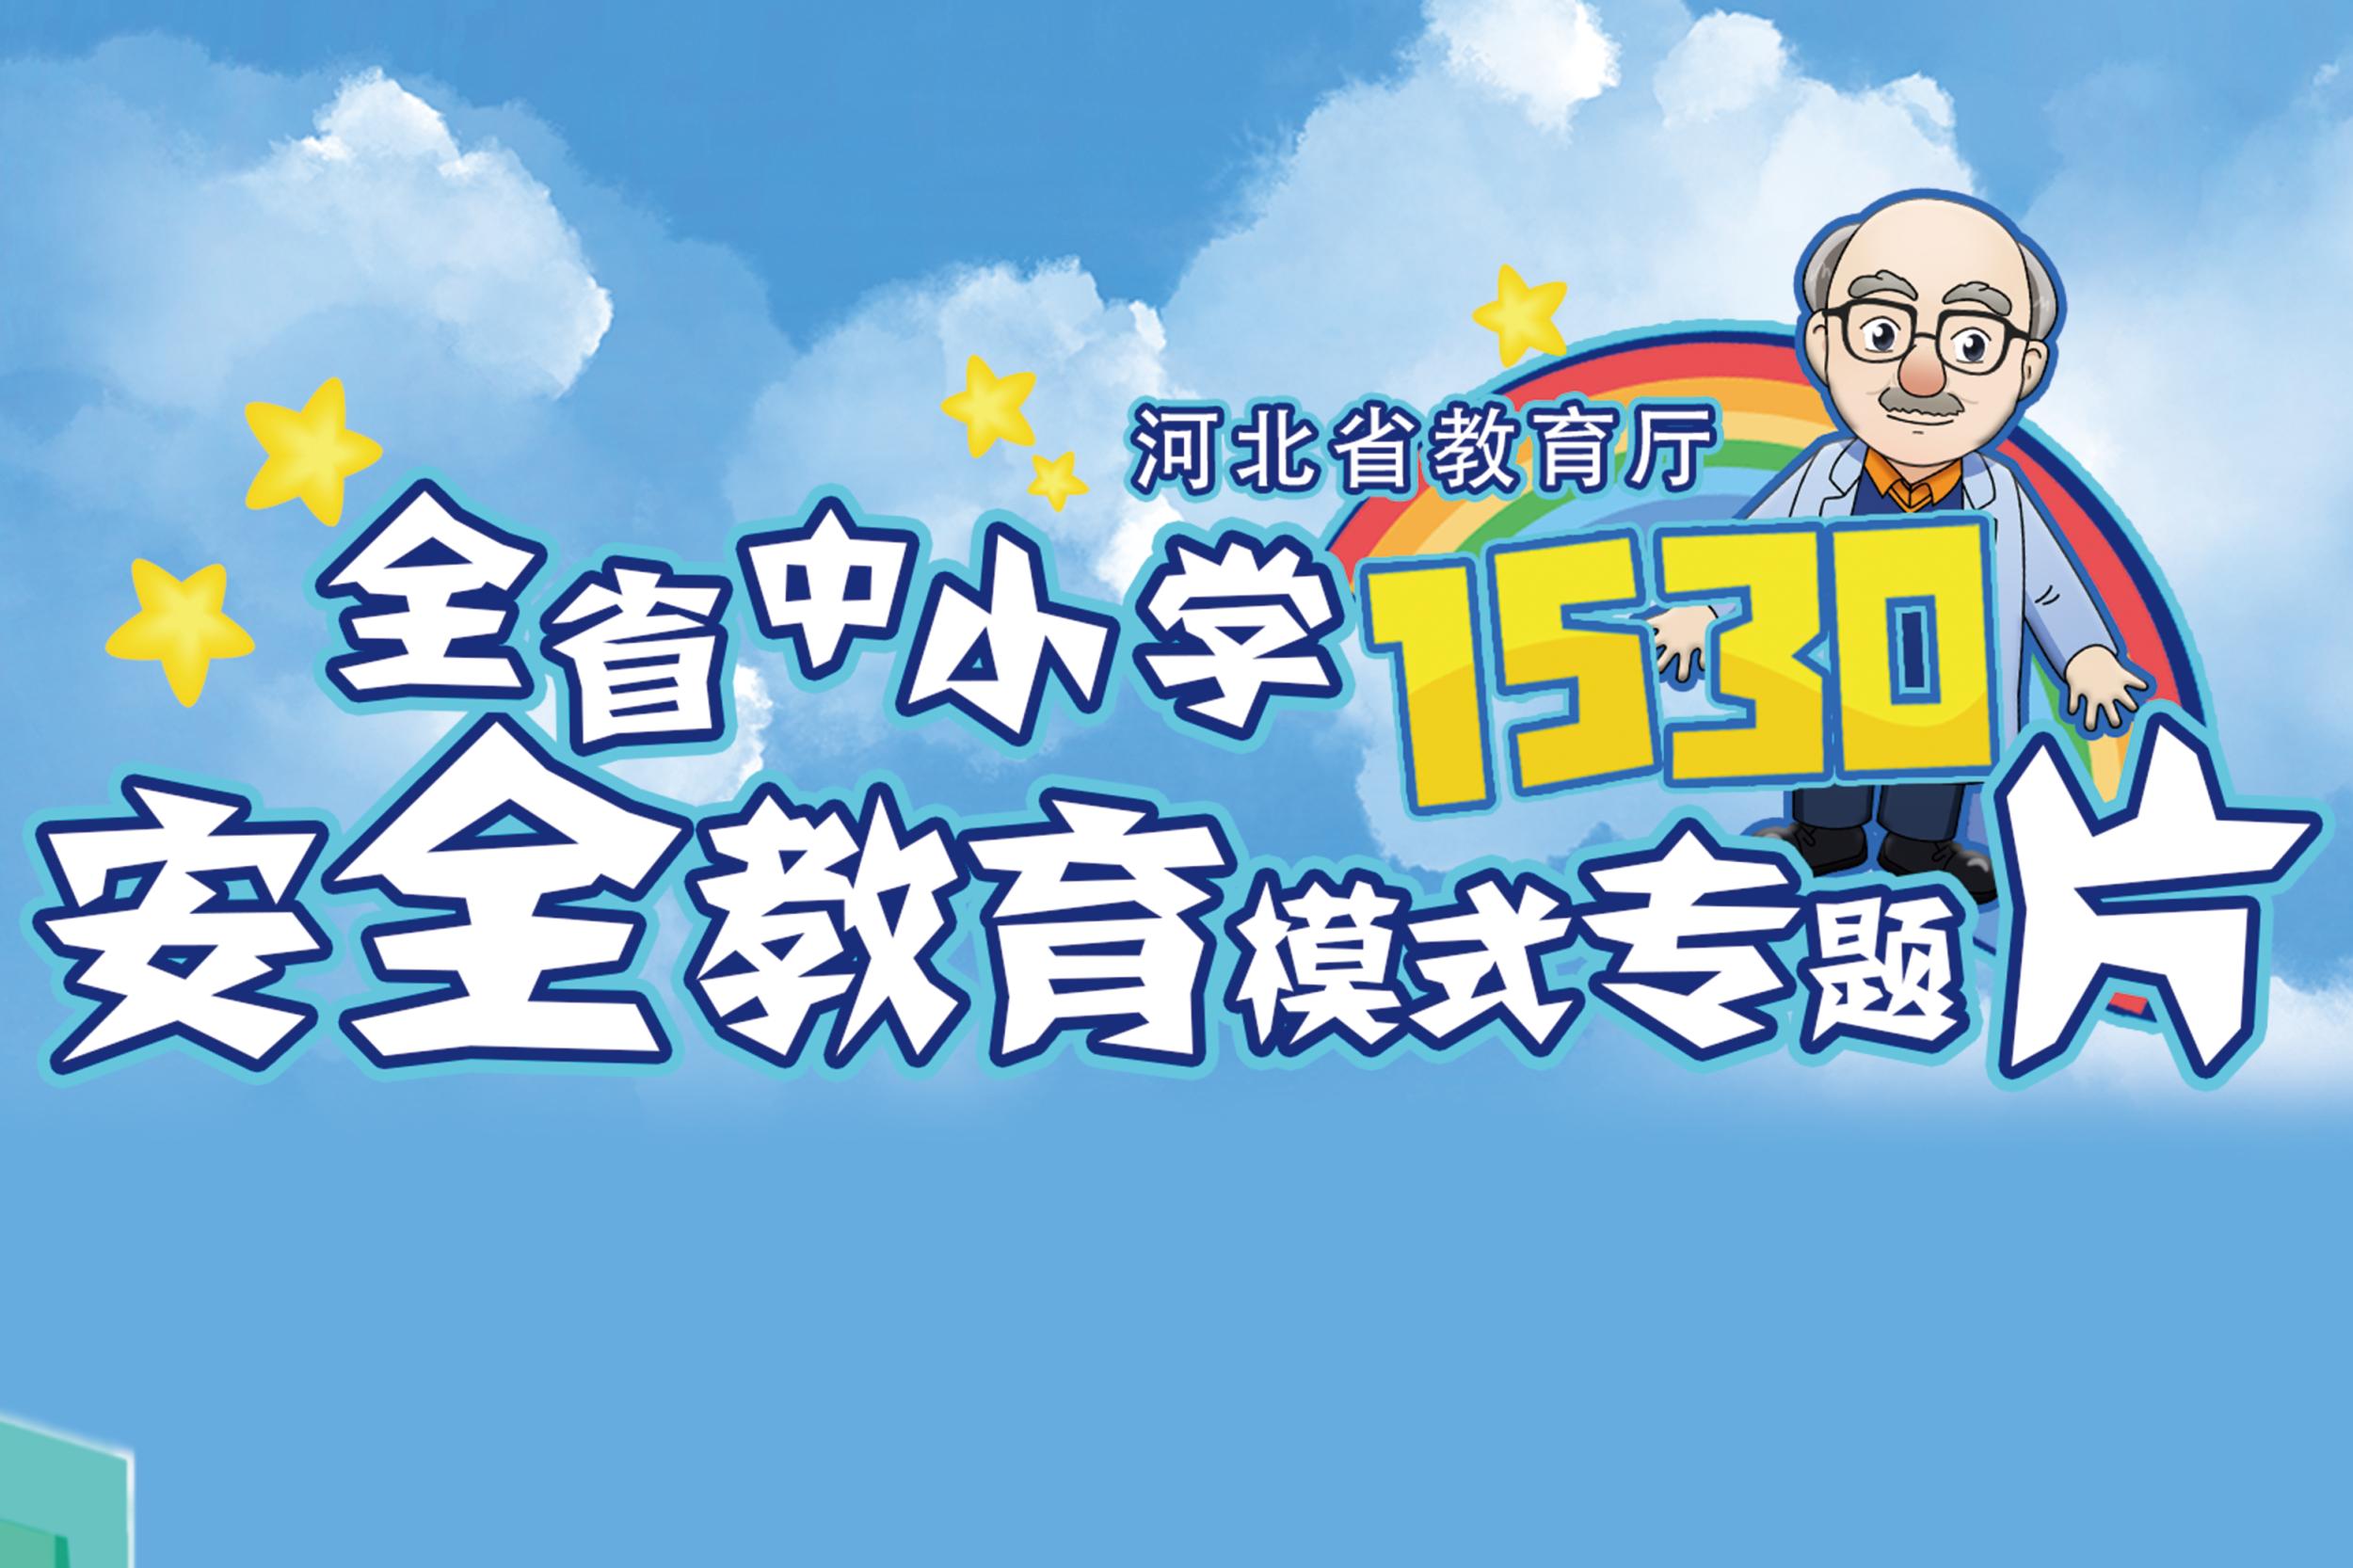  Special film of "1530" safety education model for primary and secondary schools in Hebei Province